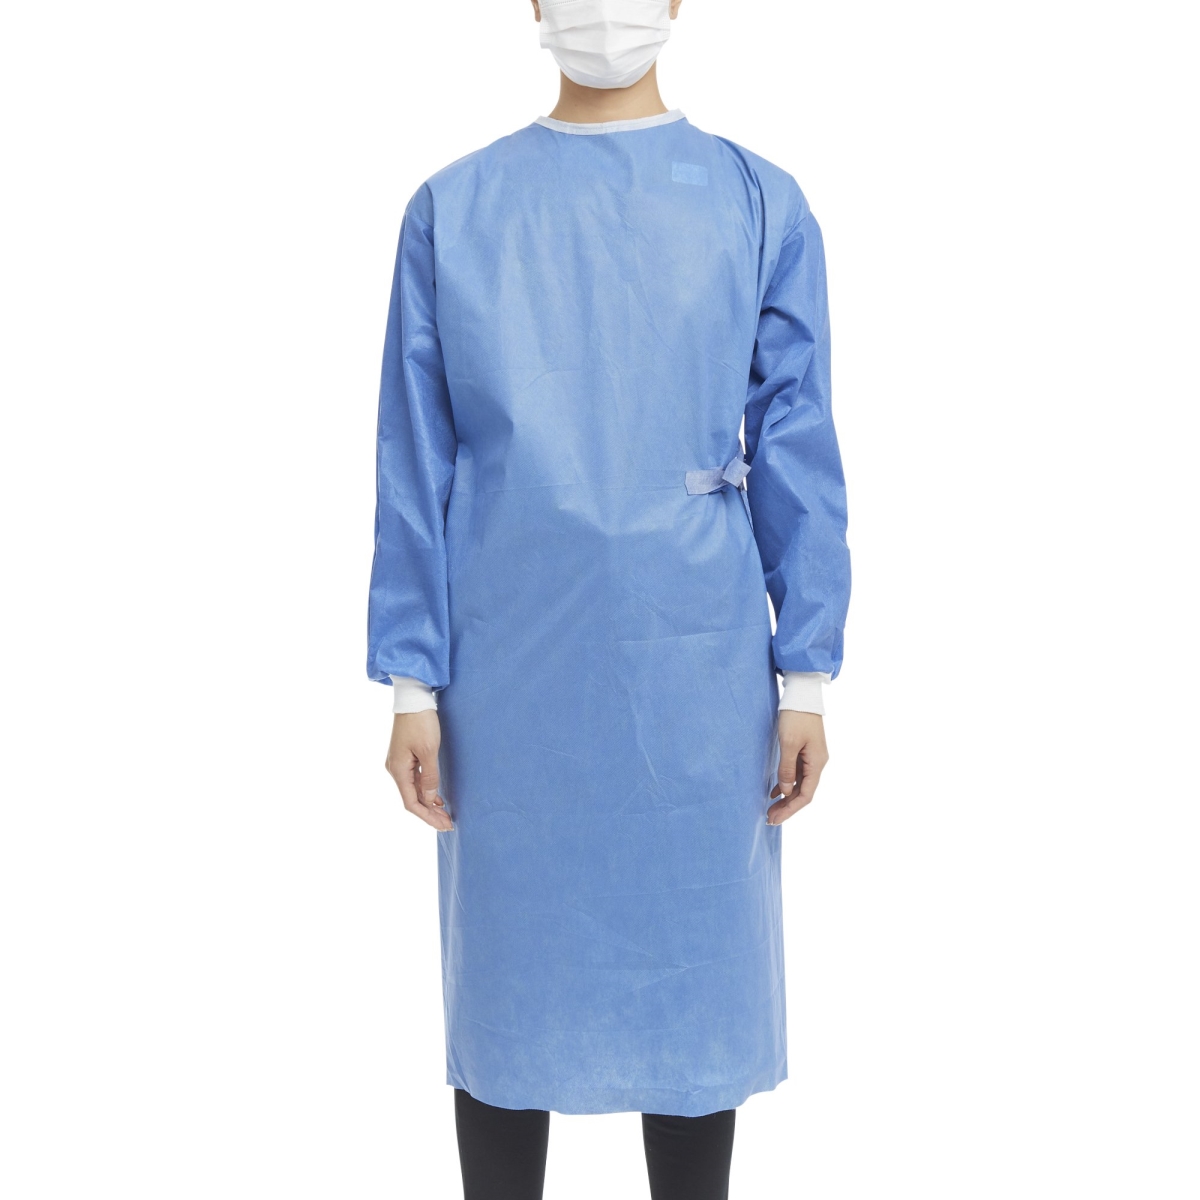 273632-EA Non-Reinforced Surgical Gown with Towel -  Astound, 273632_EA